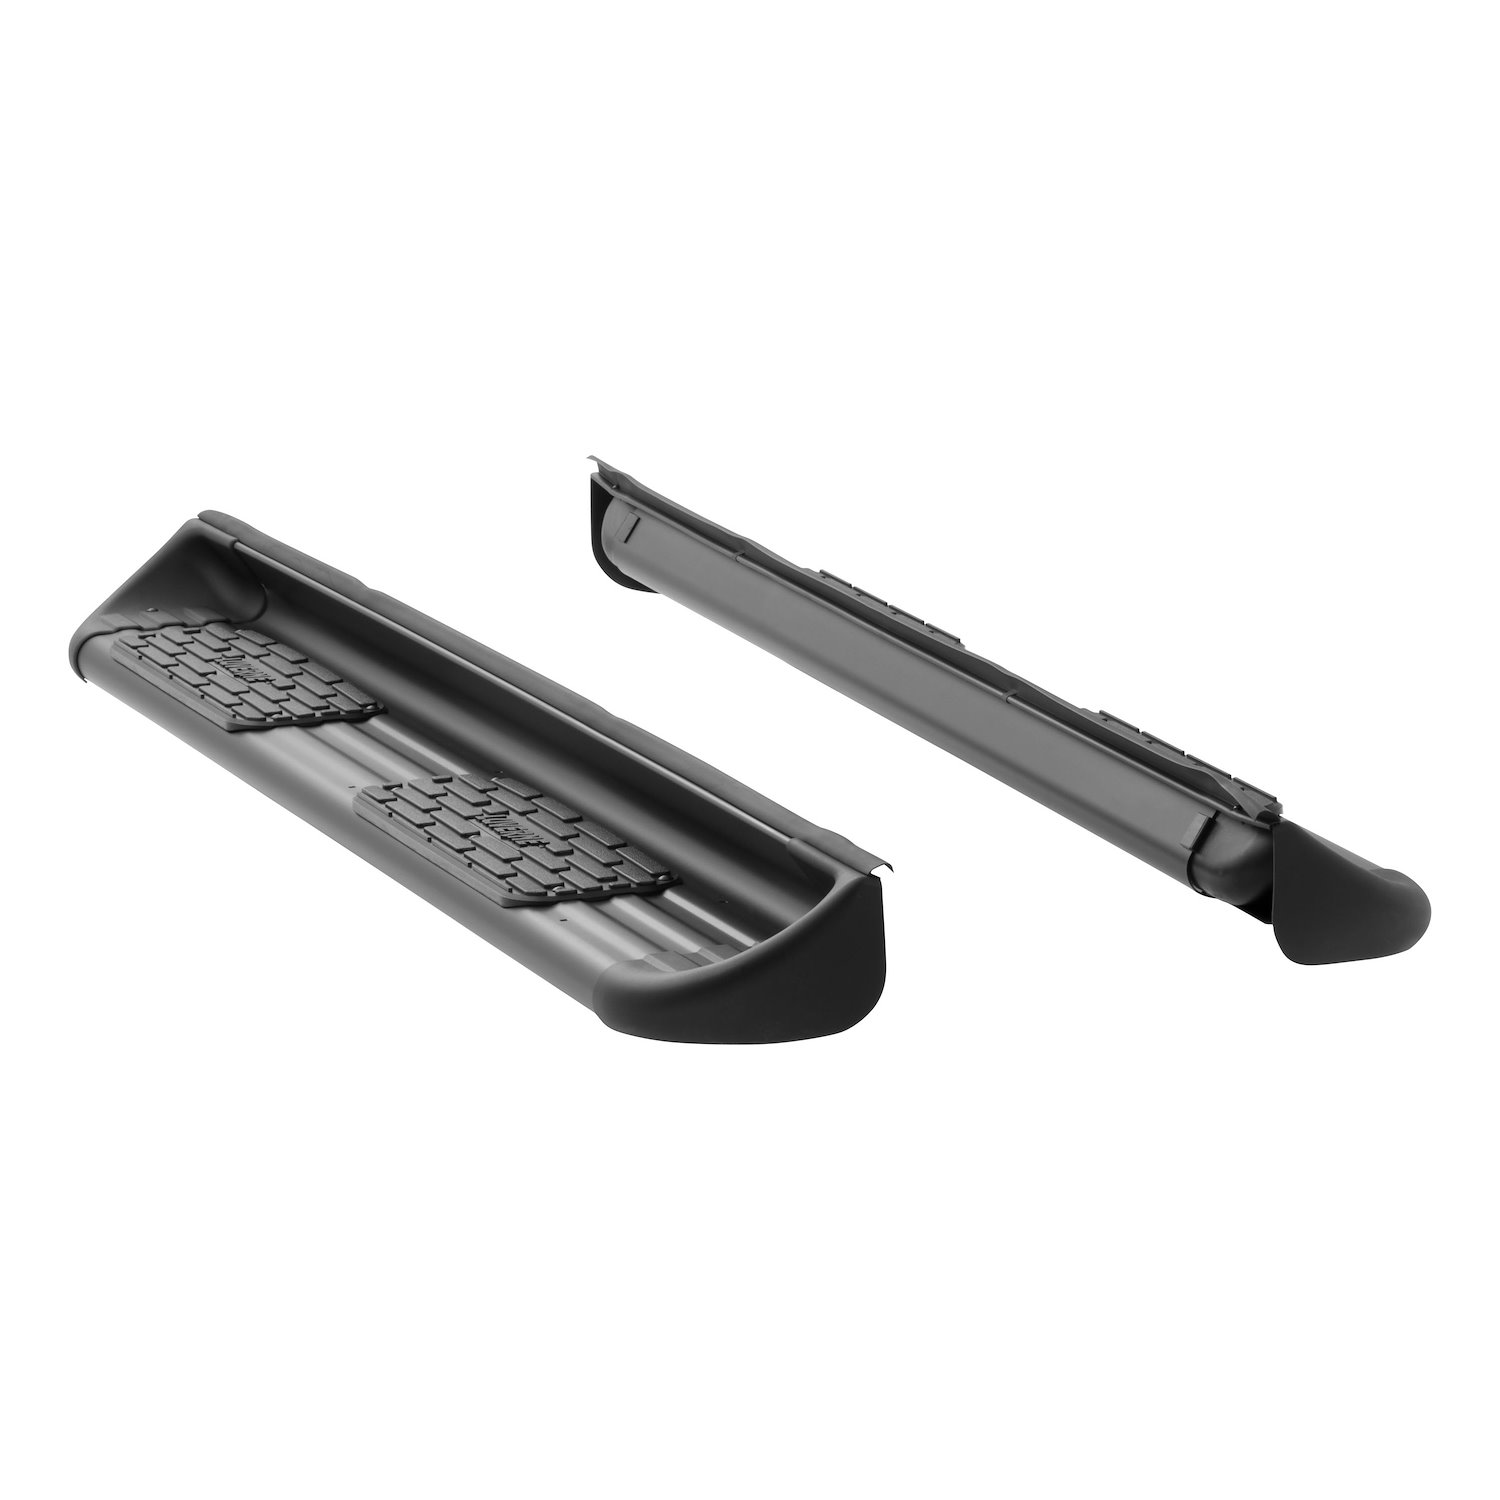 281442-581442 Black Stainless Steel Side Entry Steps Fits Select Chevy Silverado, GMC Sierra Double Cab